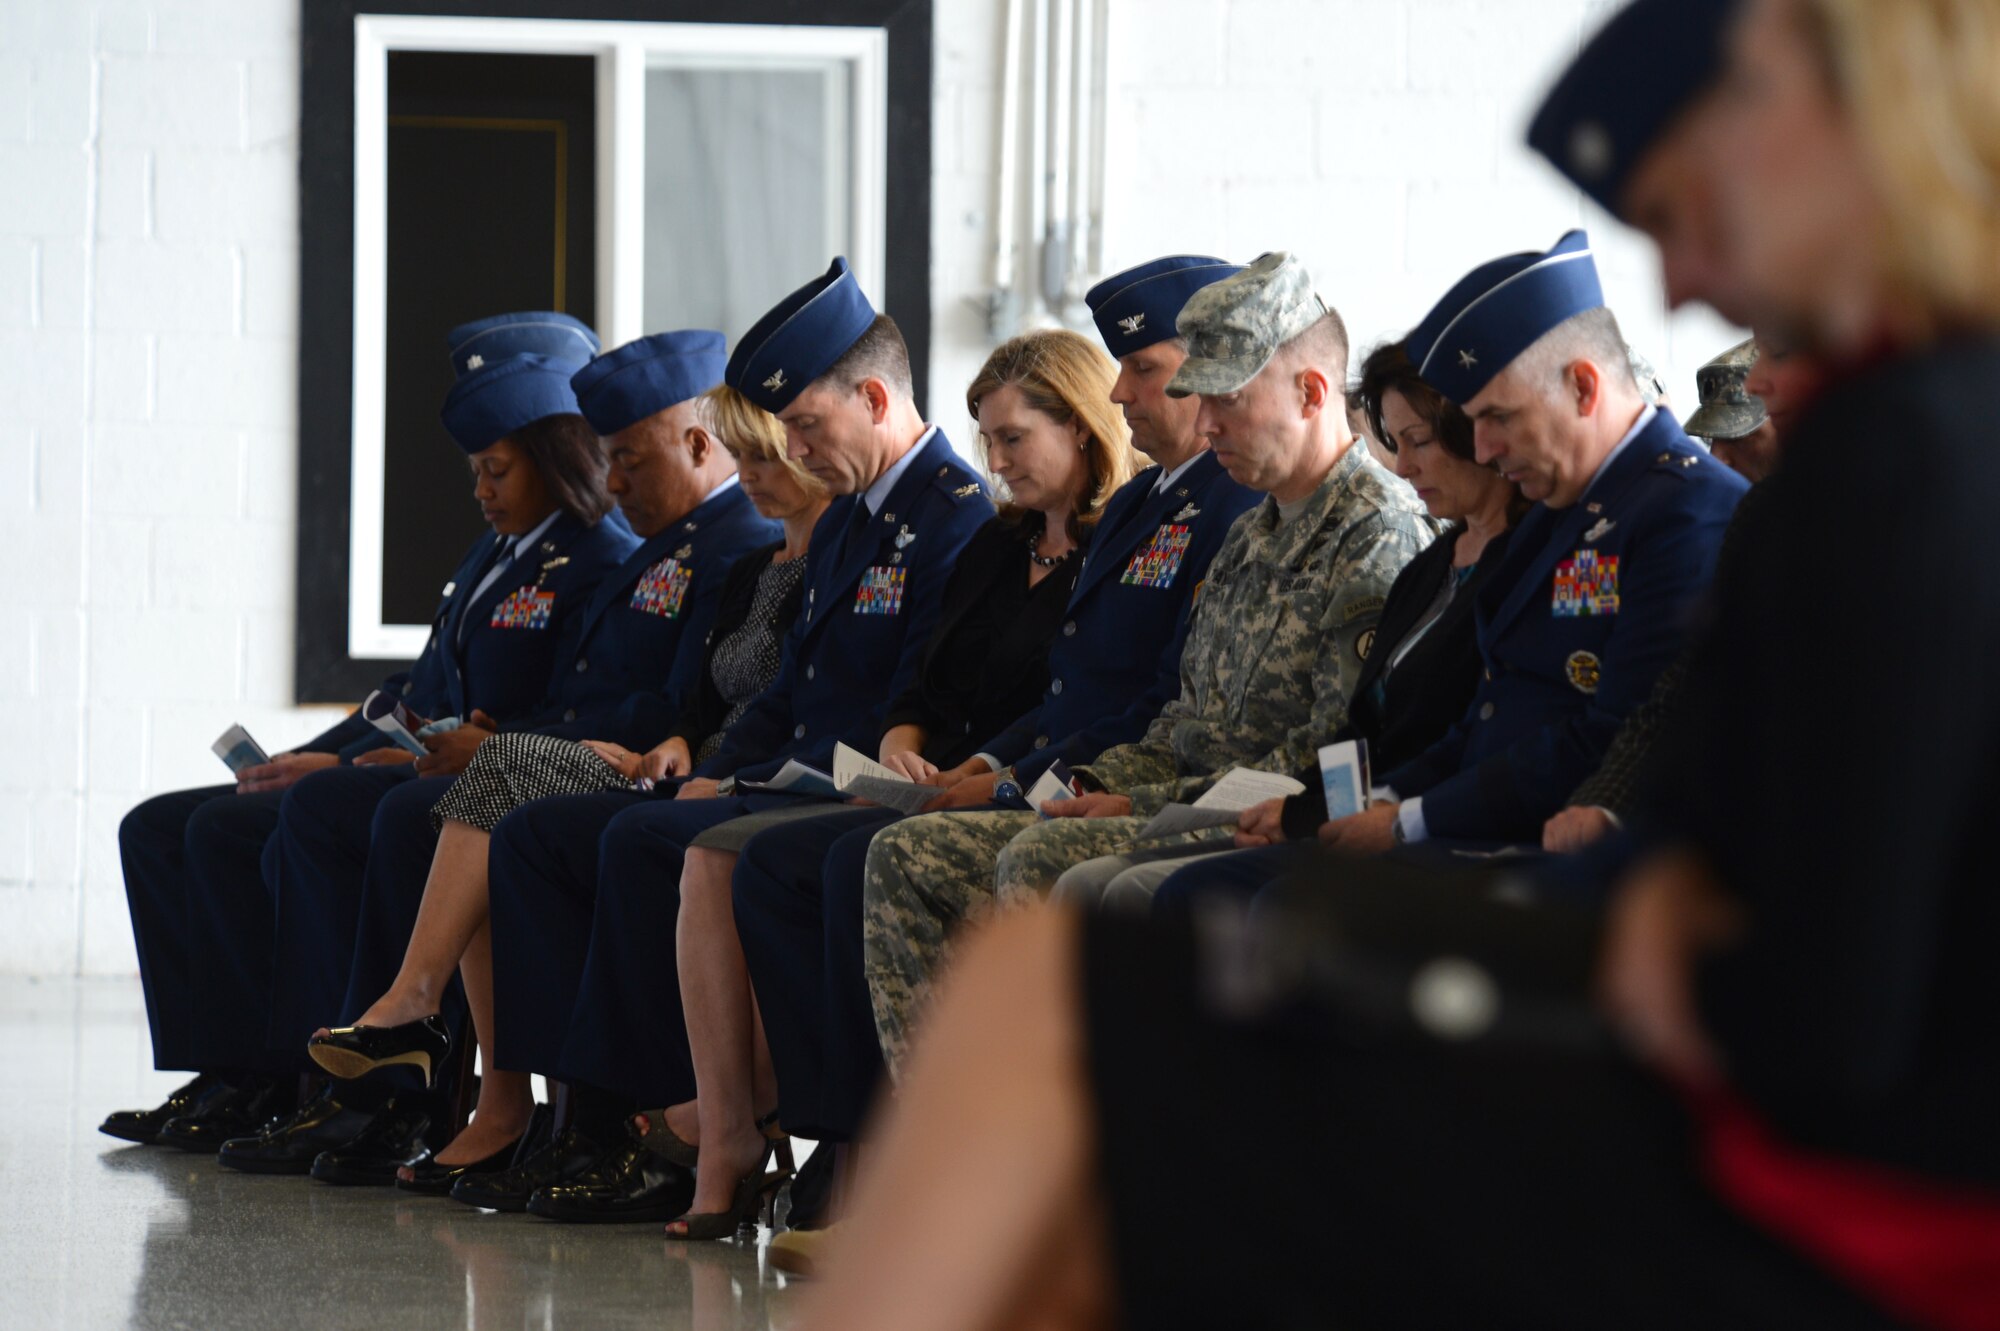 Shaw leaders bow their heads during a prayer at a memorial ceremony at Shaw Air Force Base, S.C., April 30, 2013.  The memorial ceremony commemorated the life and accomplishments of Capt. James Steel, 77th Fighter Squadron pilot, who died in an F-16 Fighting Falcon aircraft accident, while deployed to Afghanistan.  (U.S. Air Force photo by Airman 1st Class Nicole Sikorski/Released)